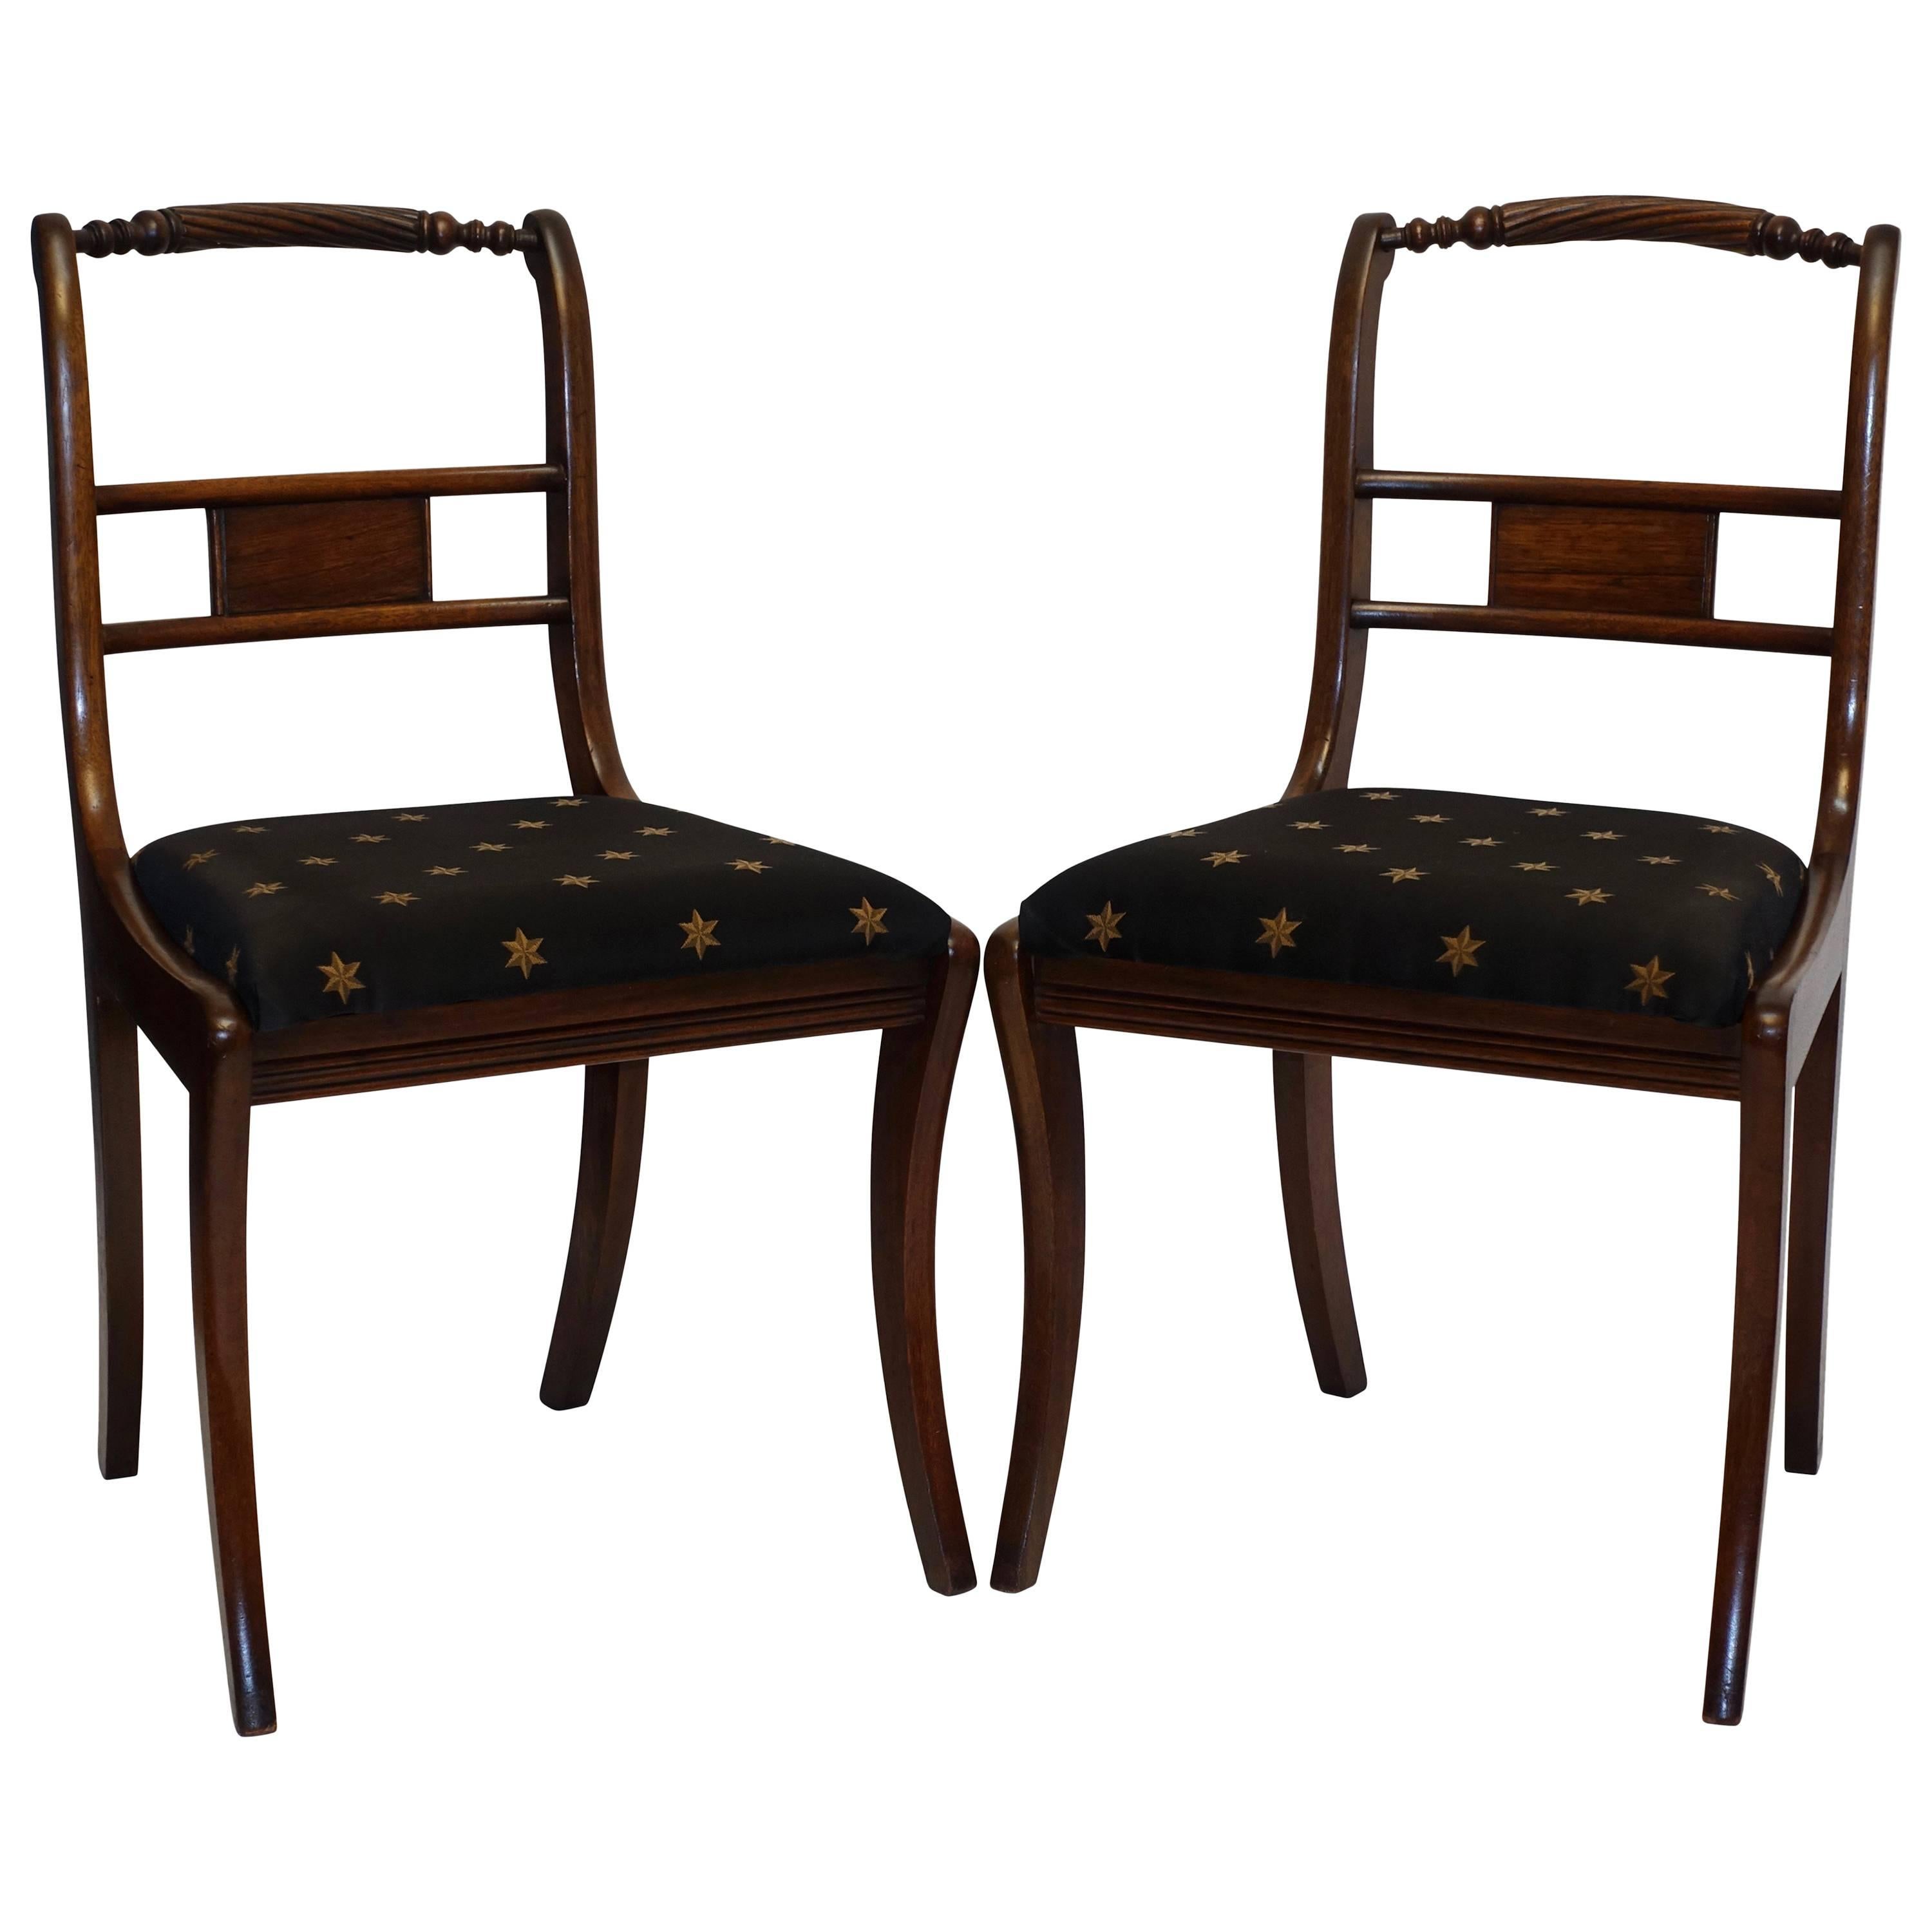 Pair of Regency Rosewood Dining Side Chairs, England, circa 1820